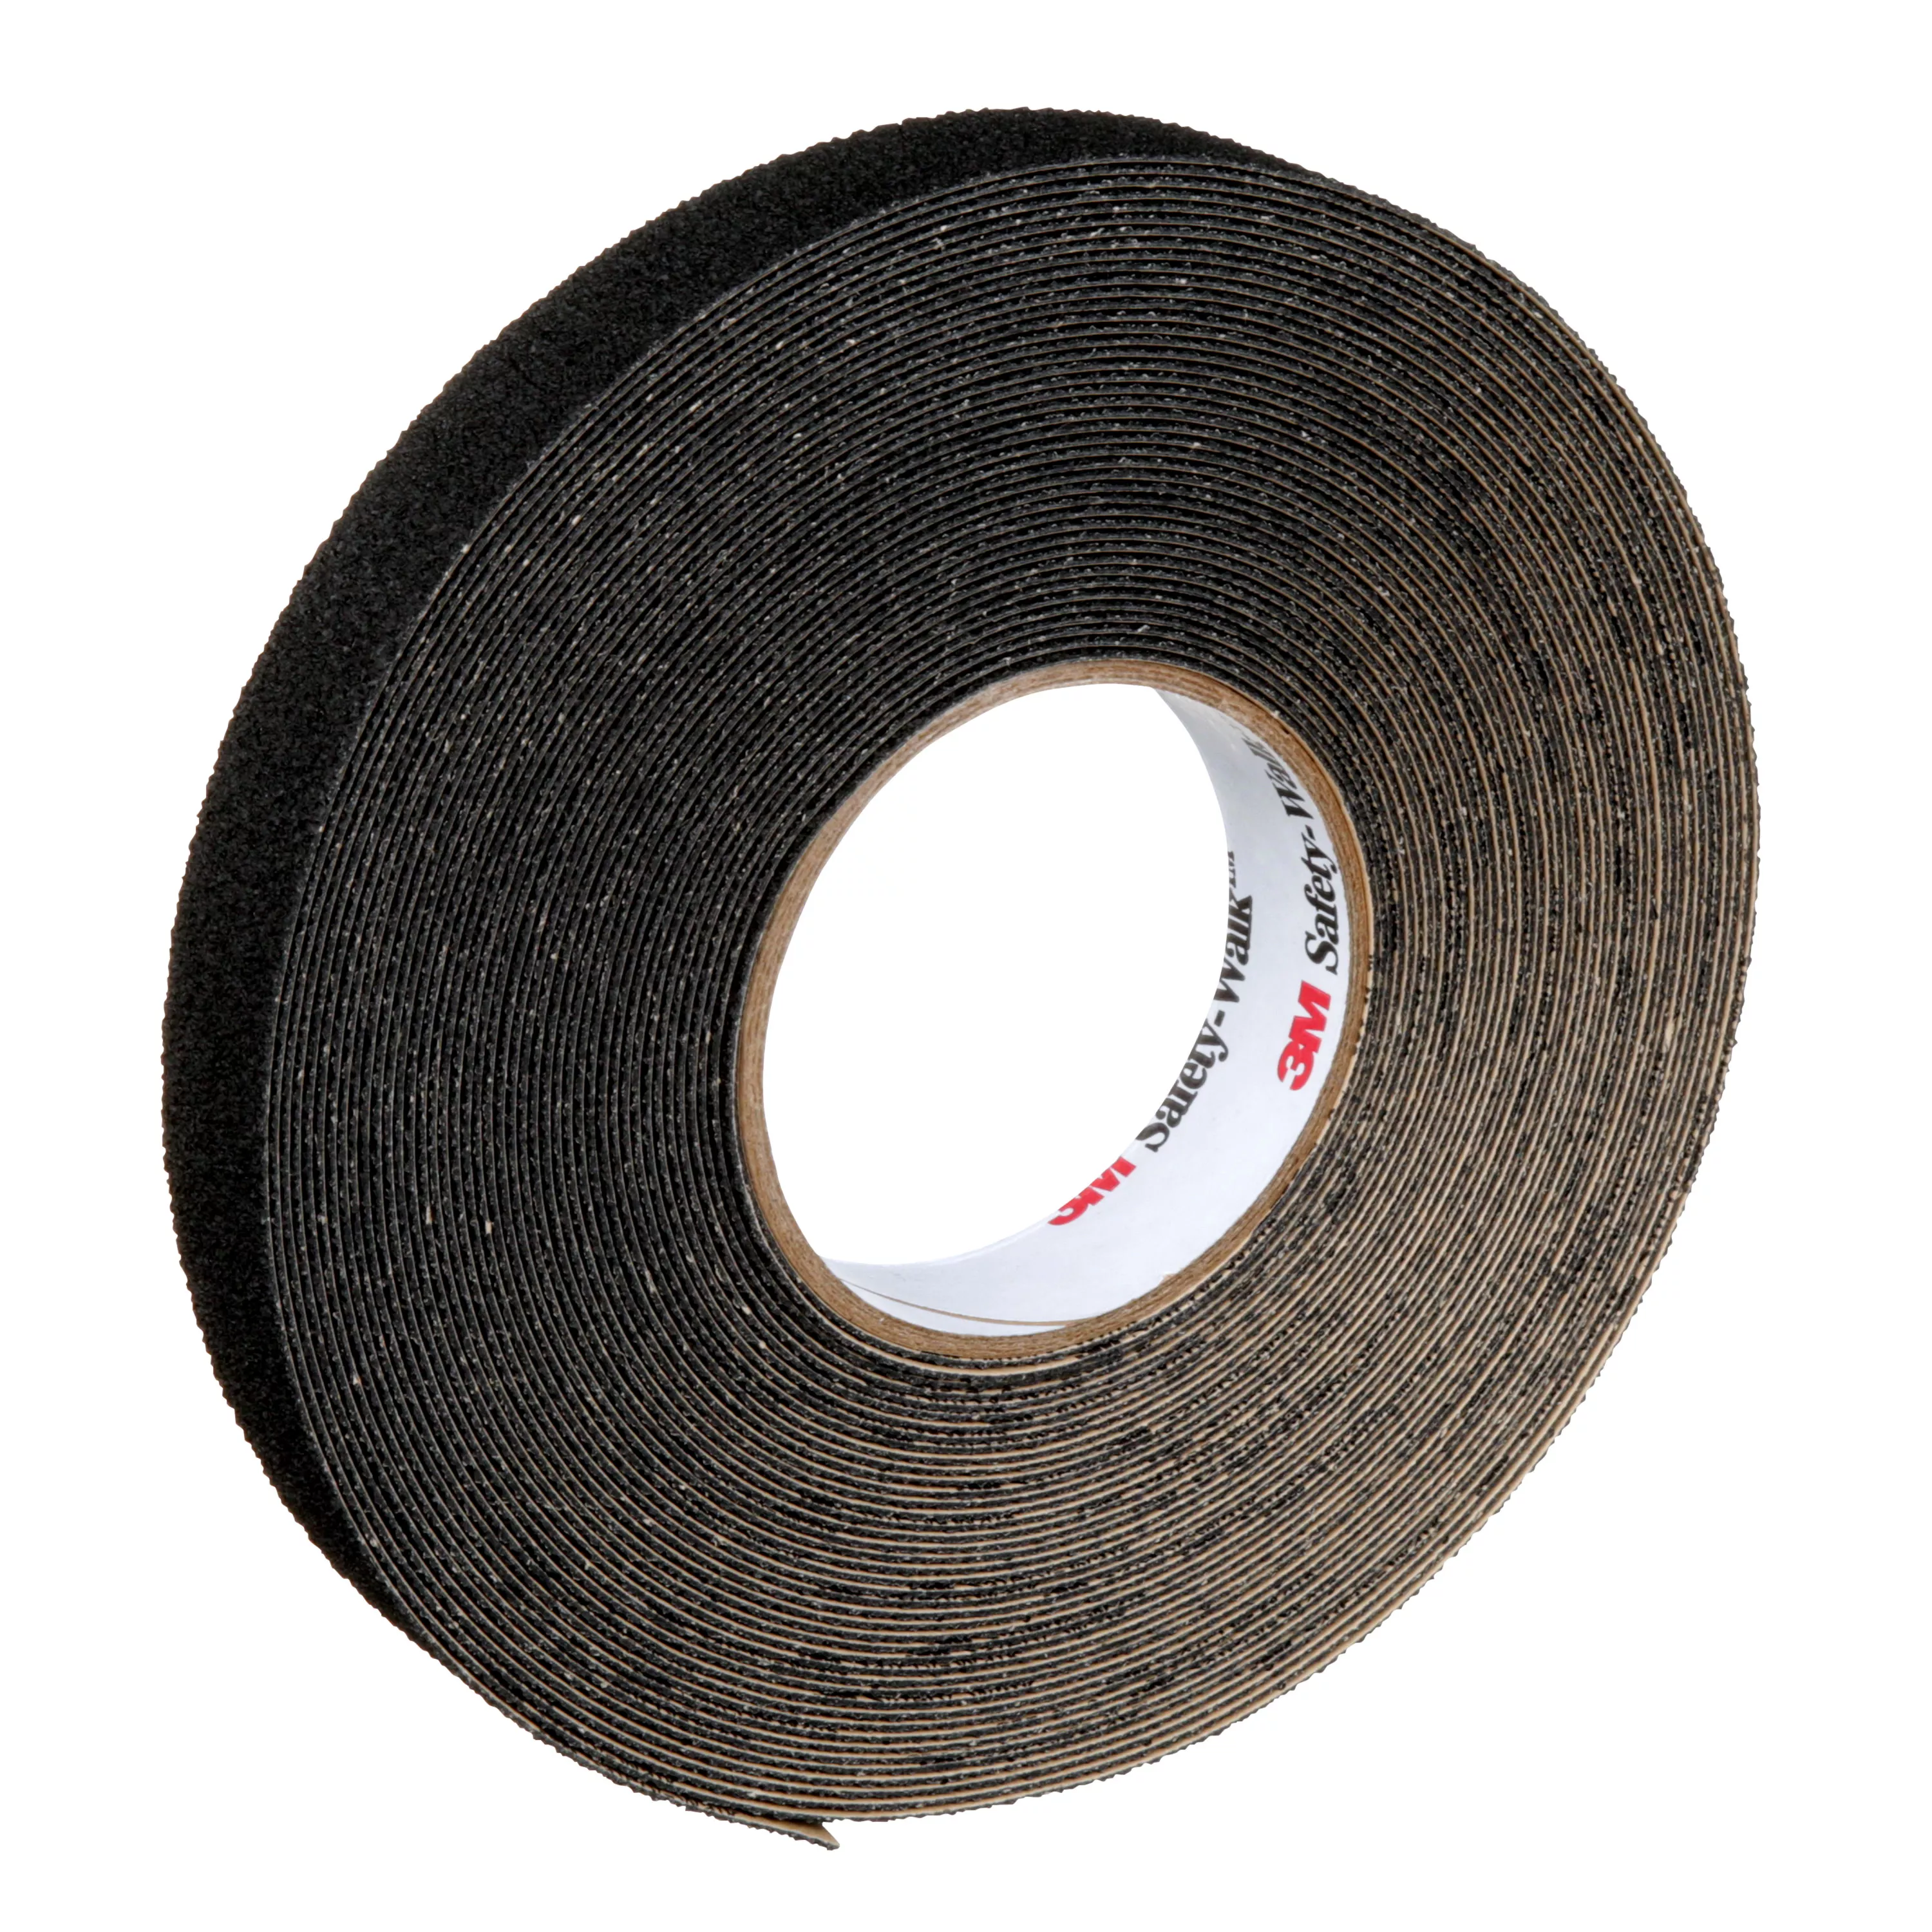 3M™ Safety-Walk™ Slip-Resistant Medium Resilient Tapes & Treads 310,
Black, 1 in x 60 ft, Roll, 4/Case